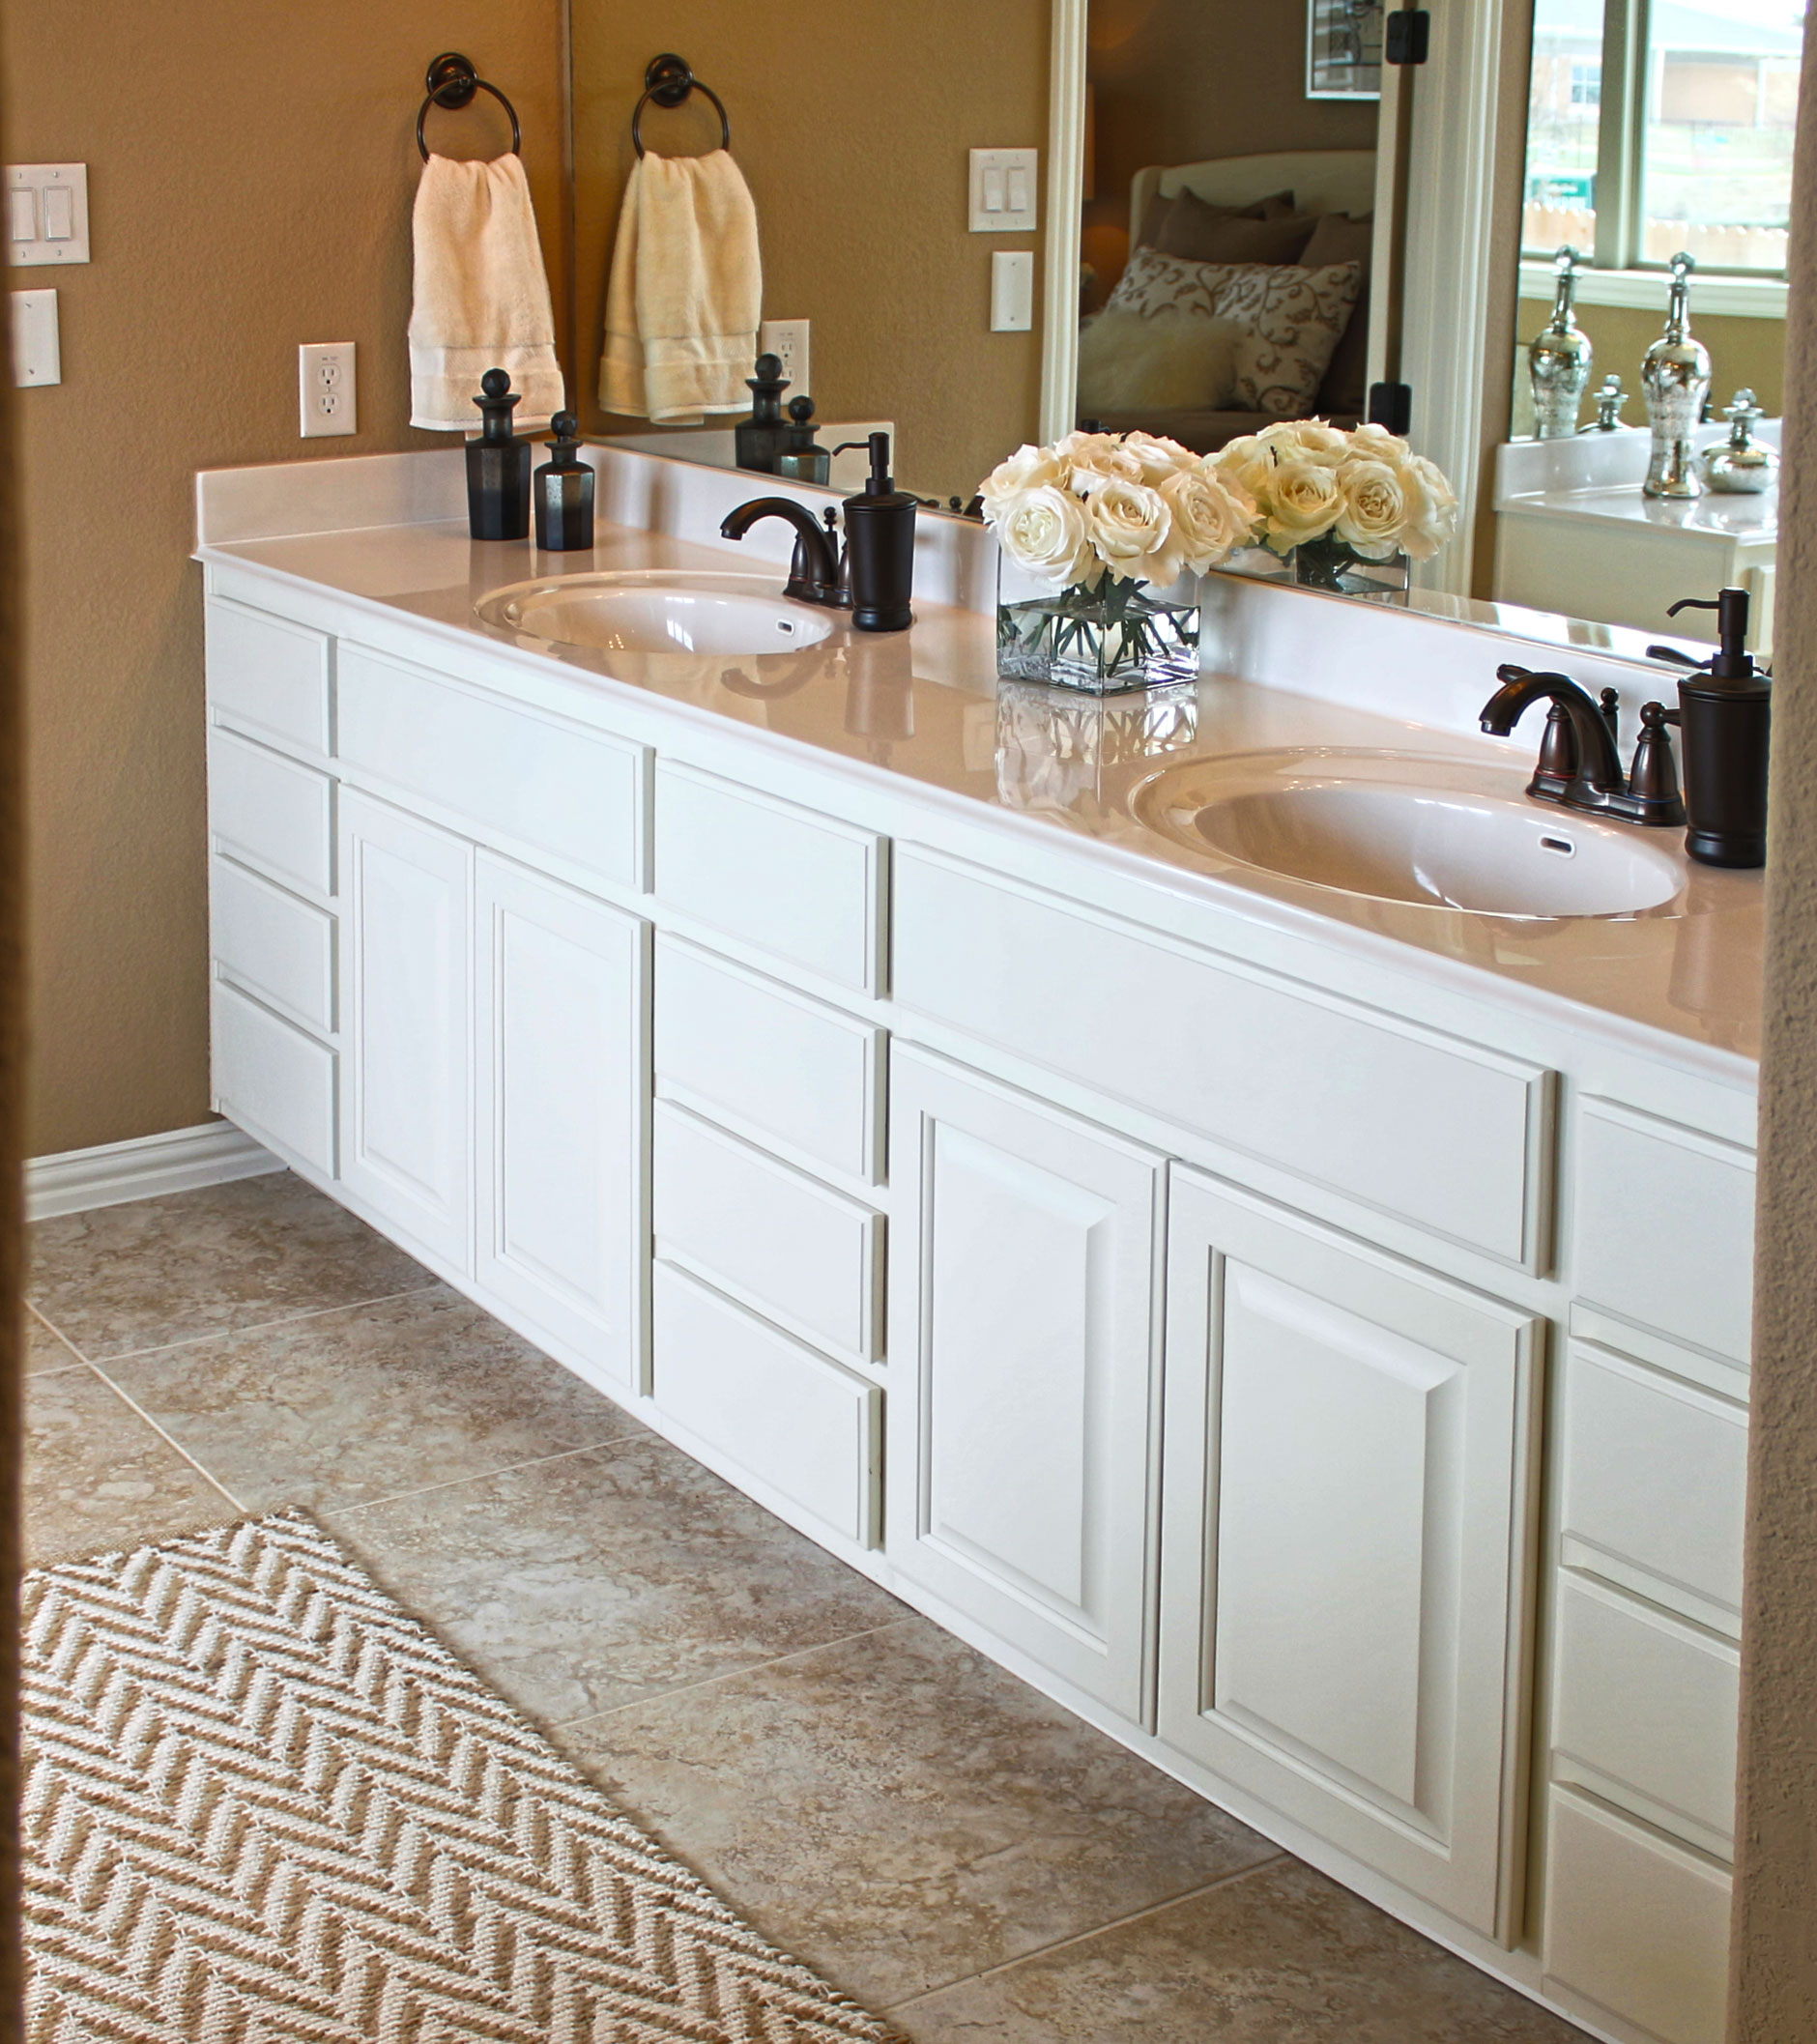 Parkside at Mayfield Ranch master bath cabinets in Bone by Burrows Cabinets